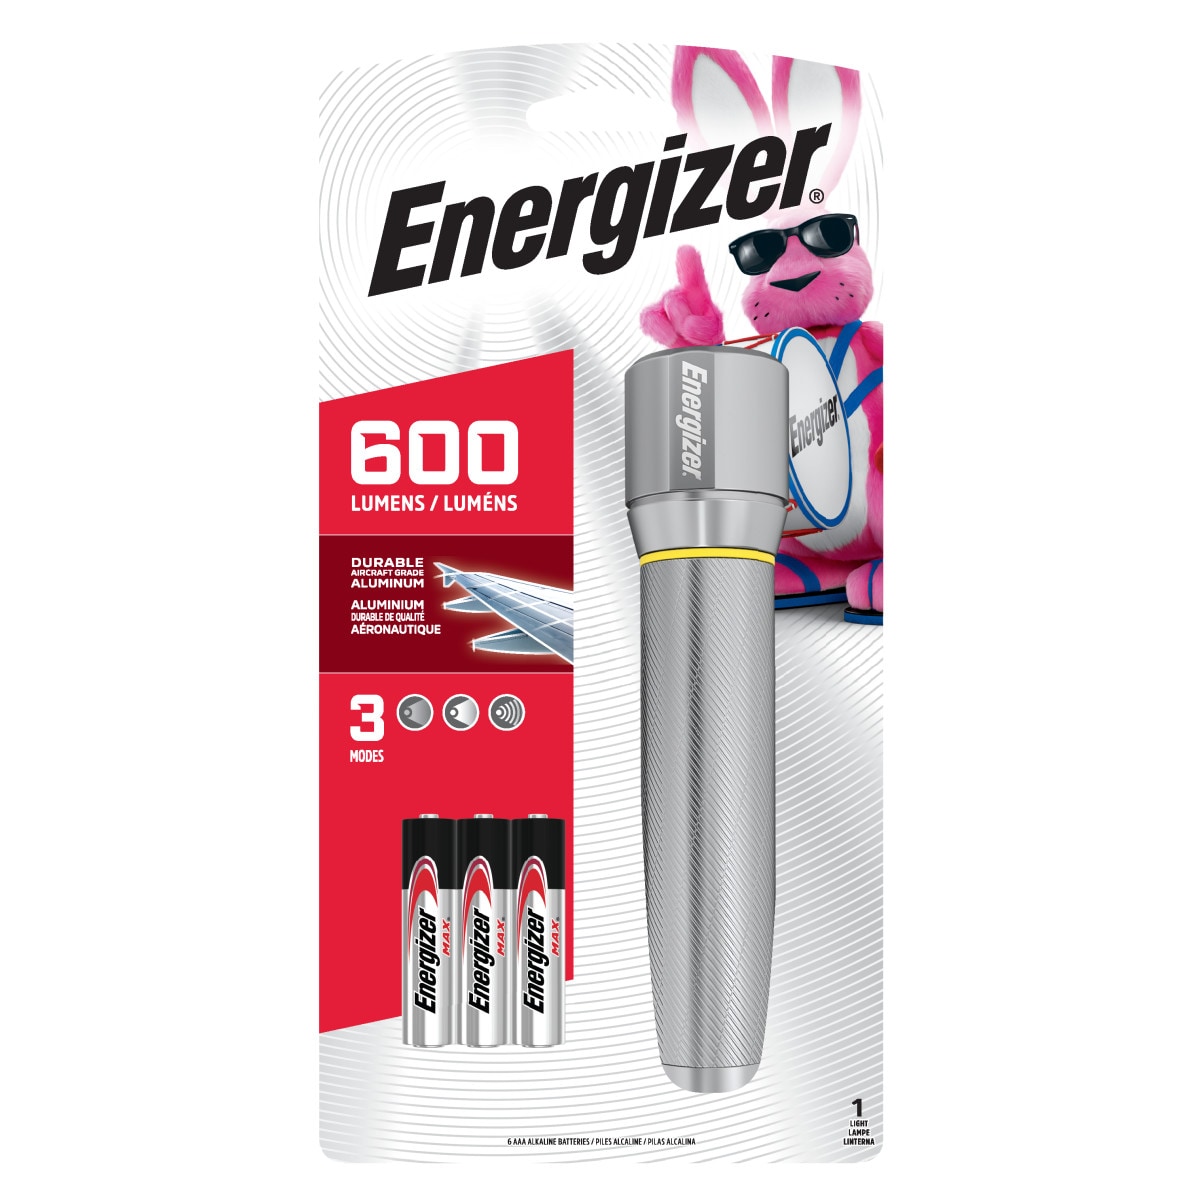 Battery at the LED Flashlights (AAA in 1 Energizer Included) 600-Lumen Flashlight department Mode Vision